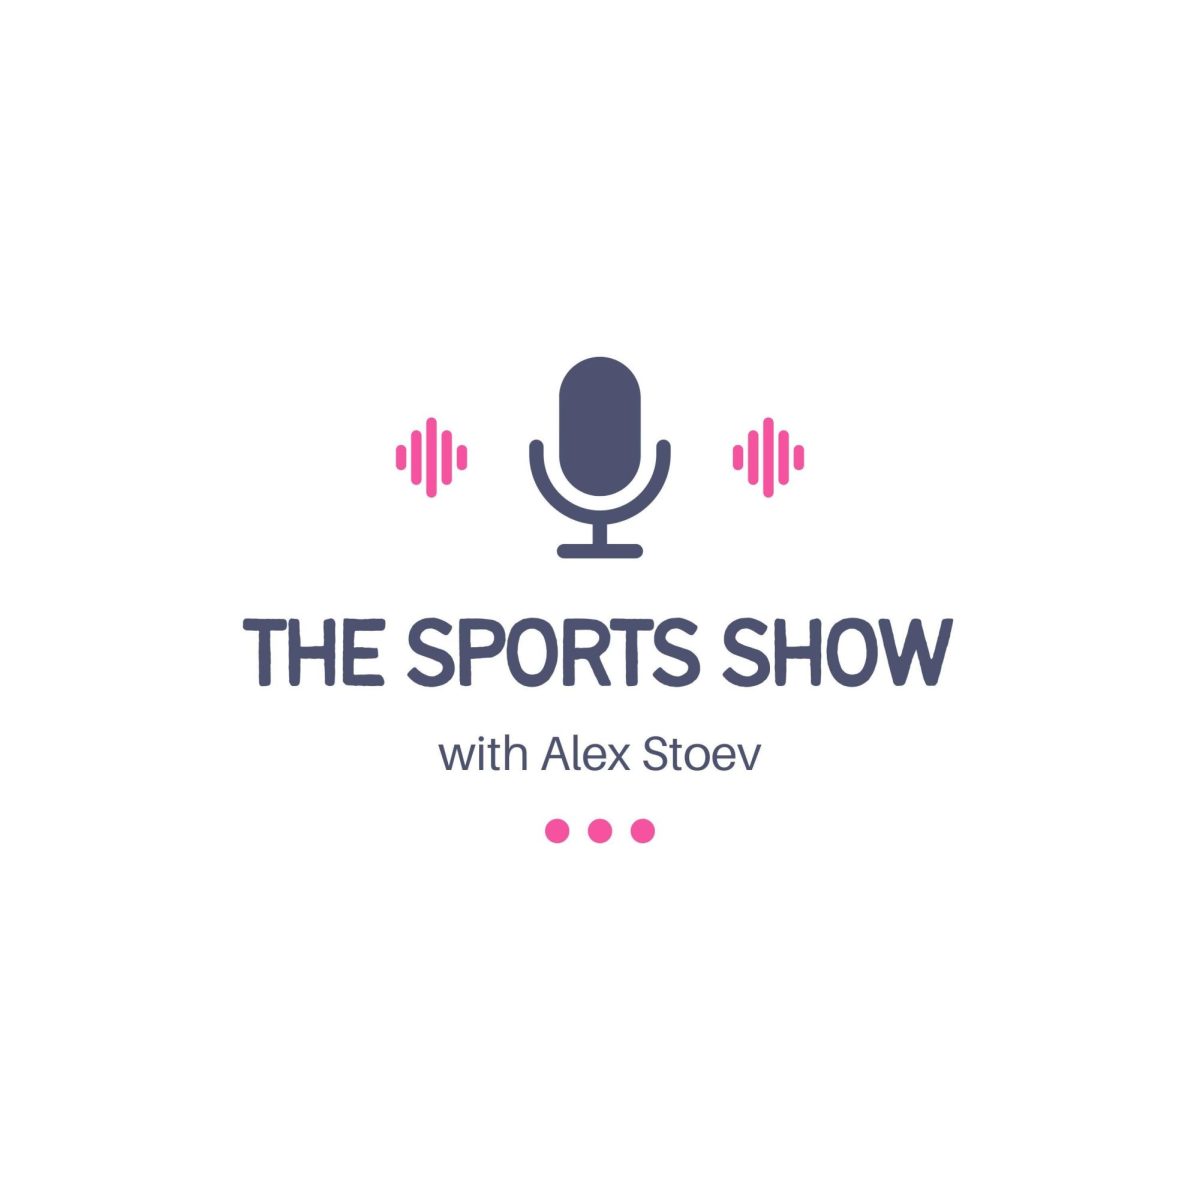 Illustration for the podcast The Sports Show with Alex Stoev.